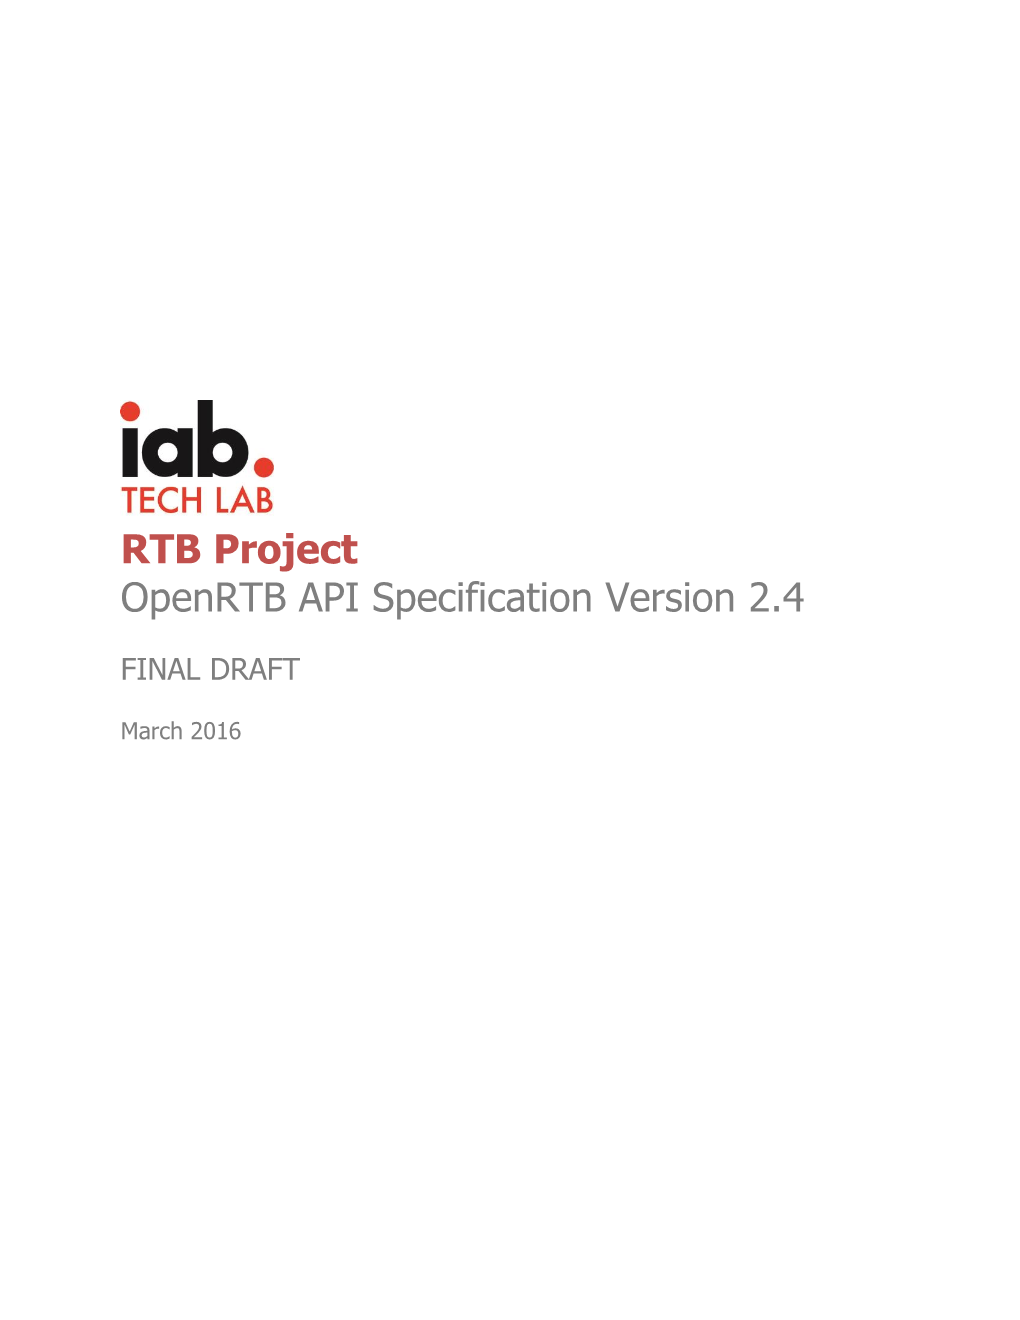 RTB Project Openrtb API Specification Version 2.4